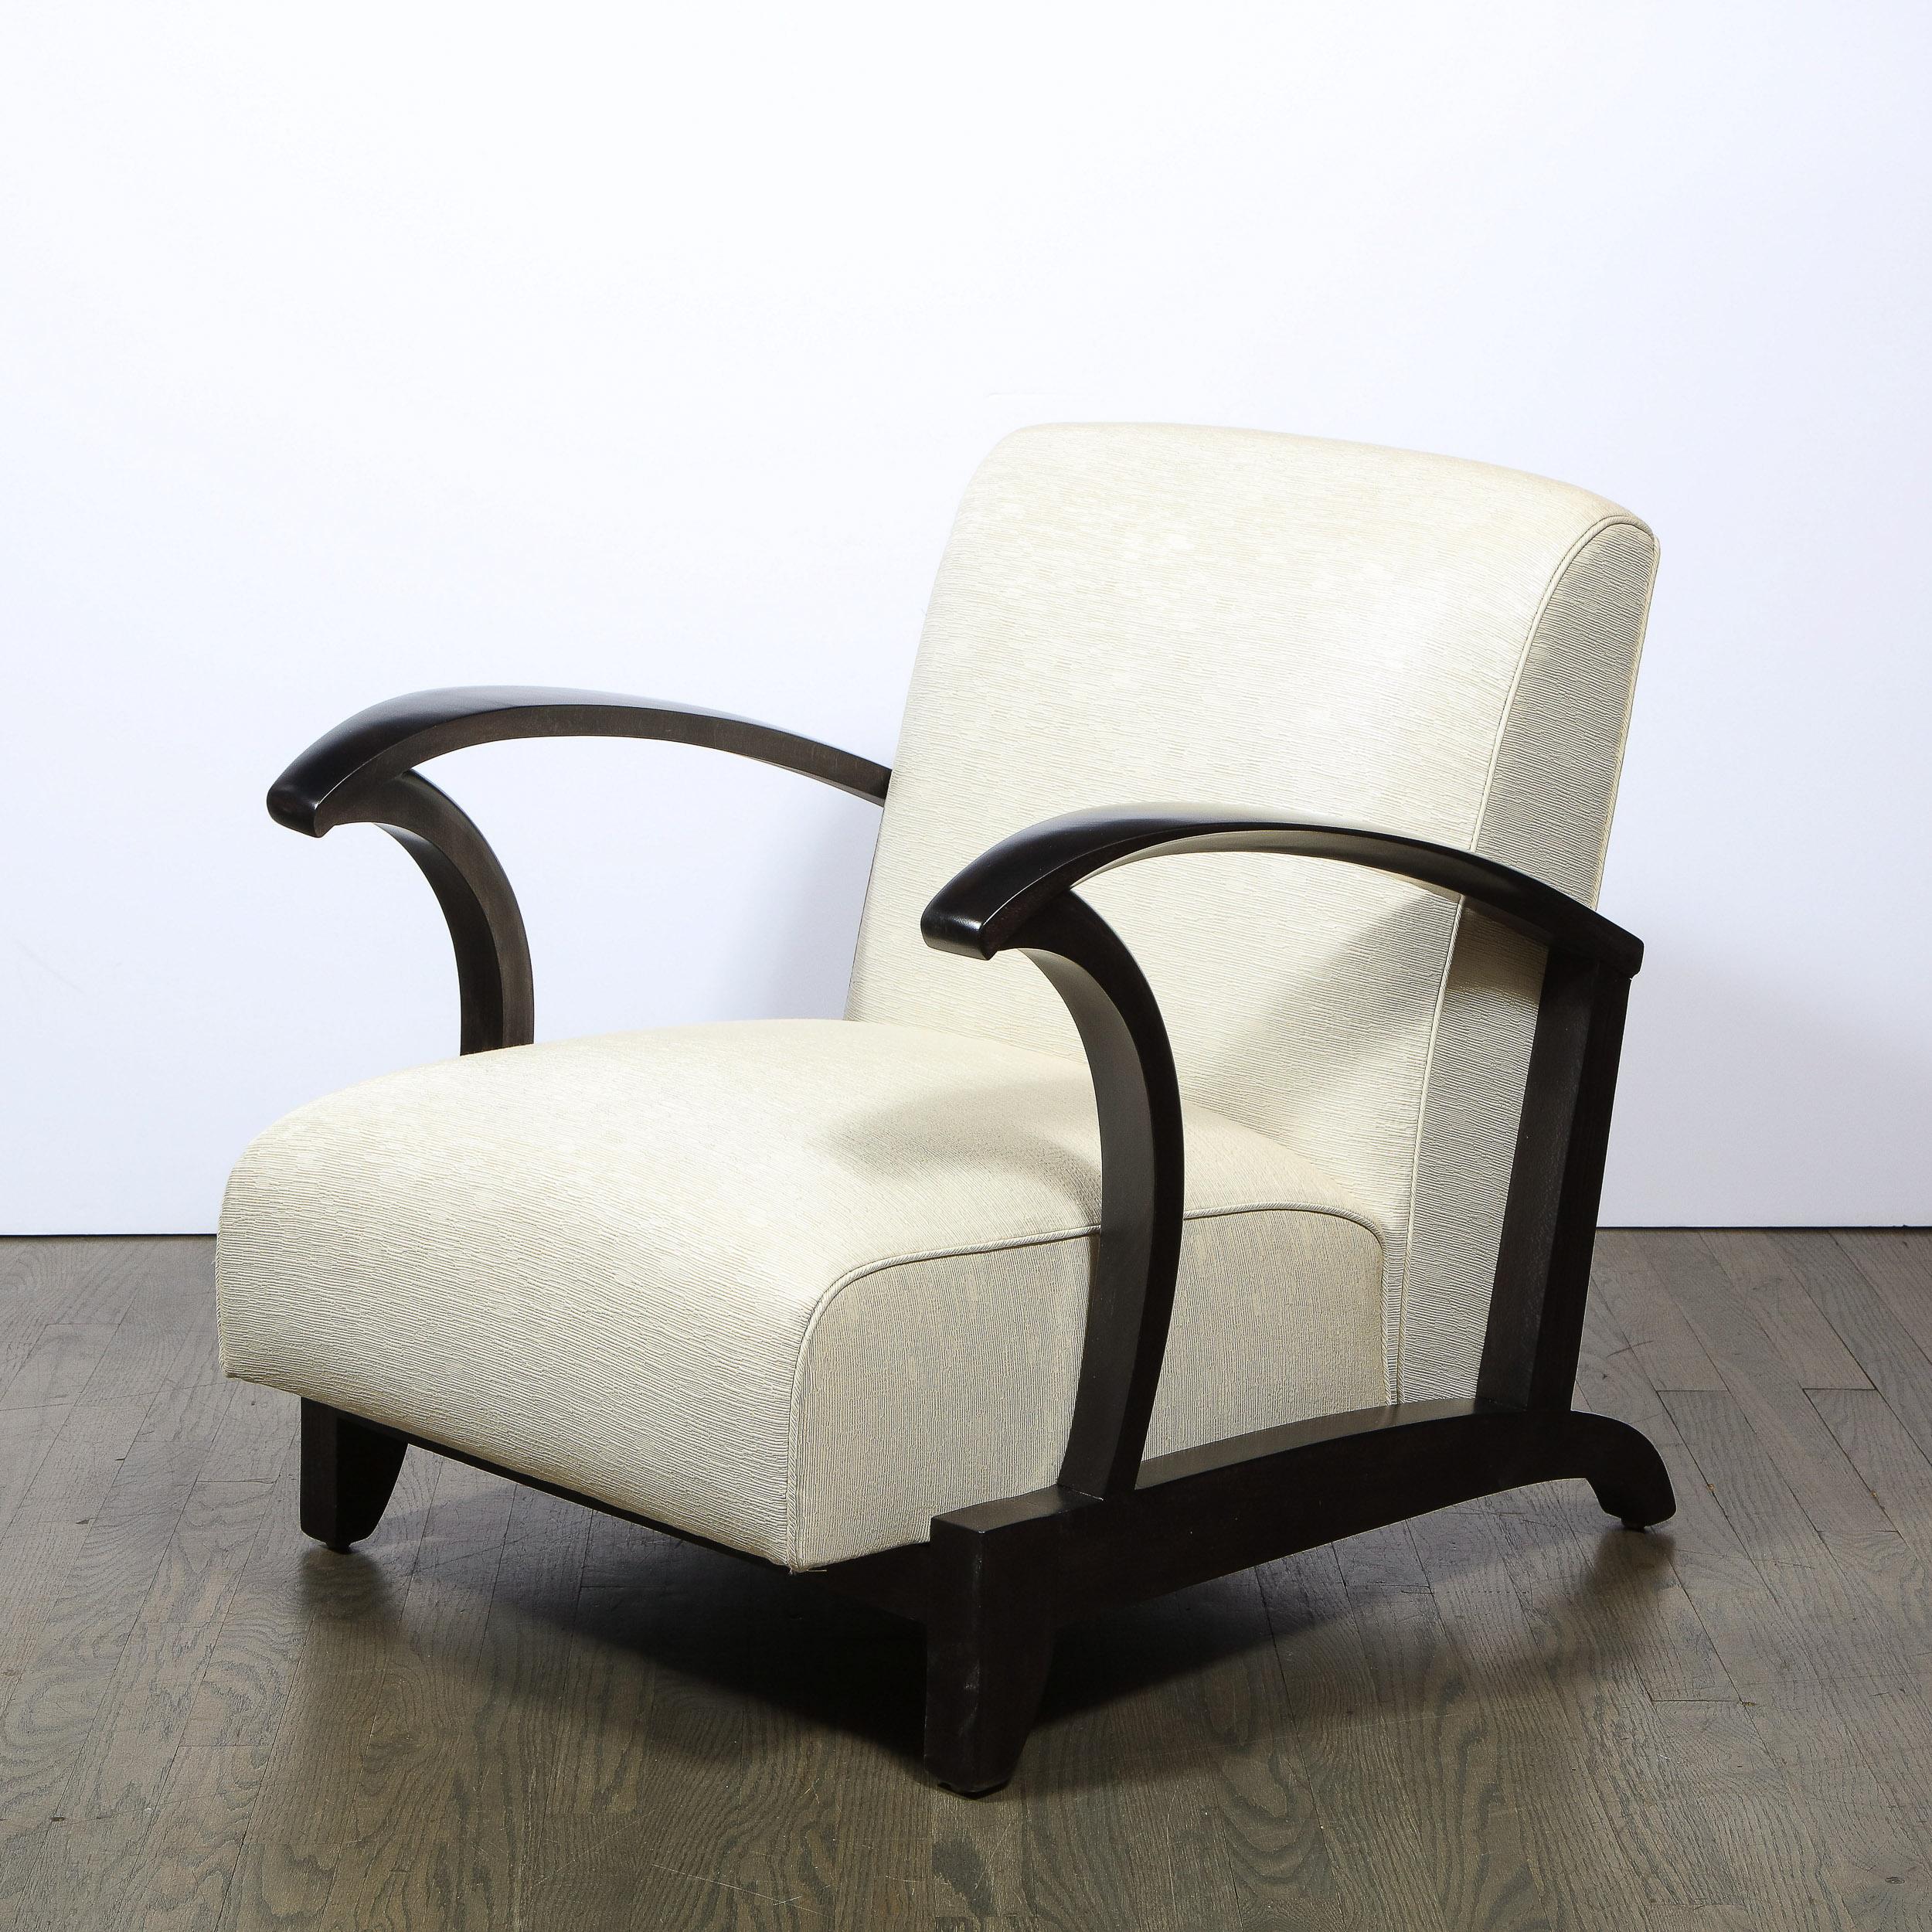 American Pair of 1940s Ebonized Walnut Club Chairs in Great Plains Fabric by Holly Hunt